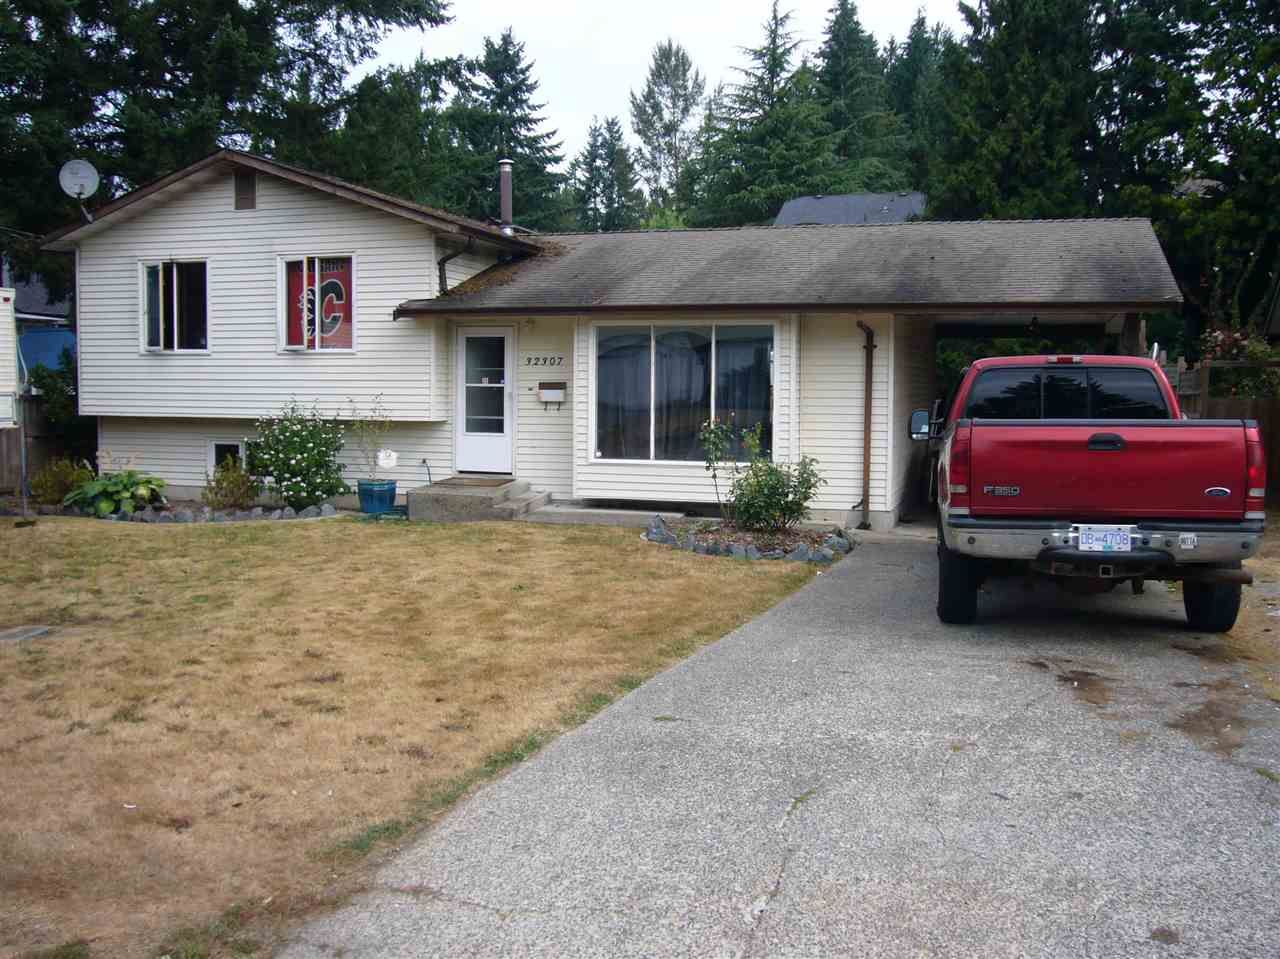 Main Photo: 32307 14TH Avenue in Mission: Mission BC House for sale : MLS®# R2196901